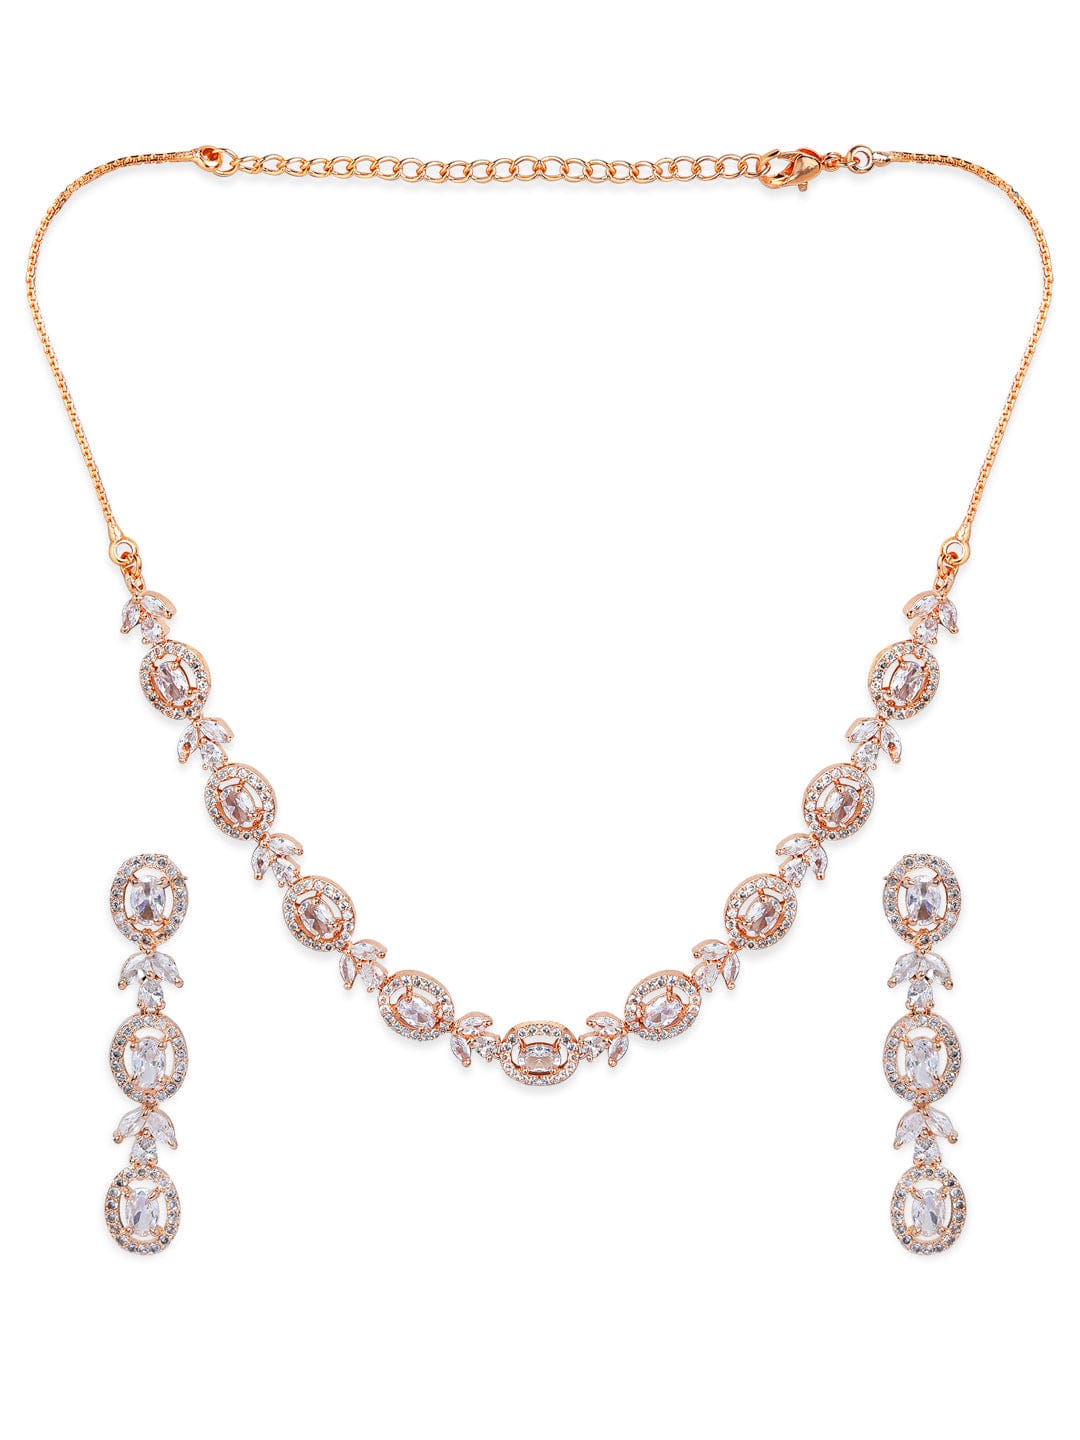 Rubans Simple Gold Toned CZ Necklace Set with Long Earrings Necklace Set